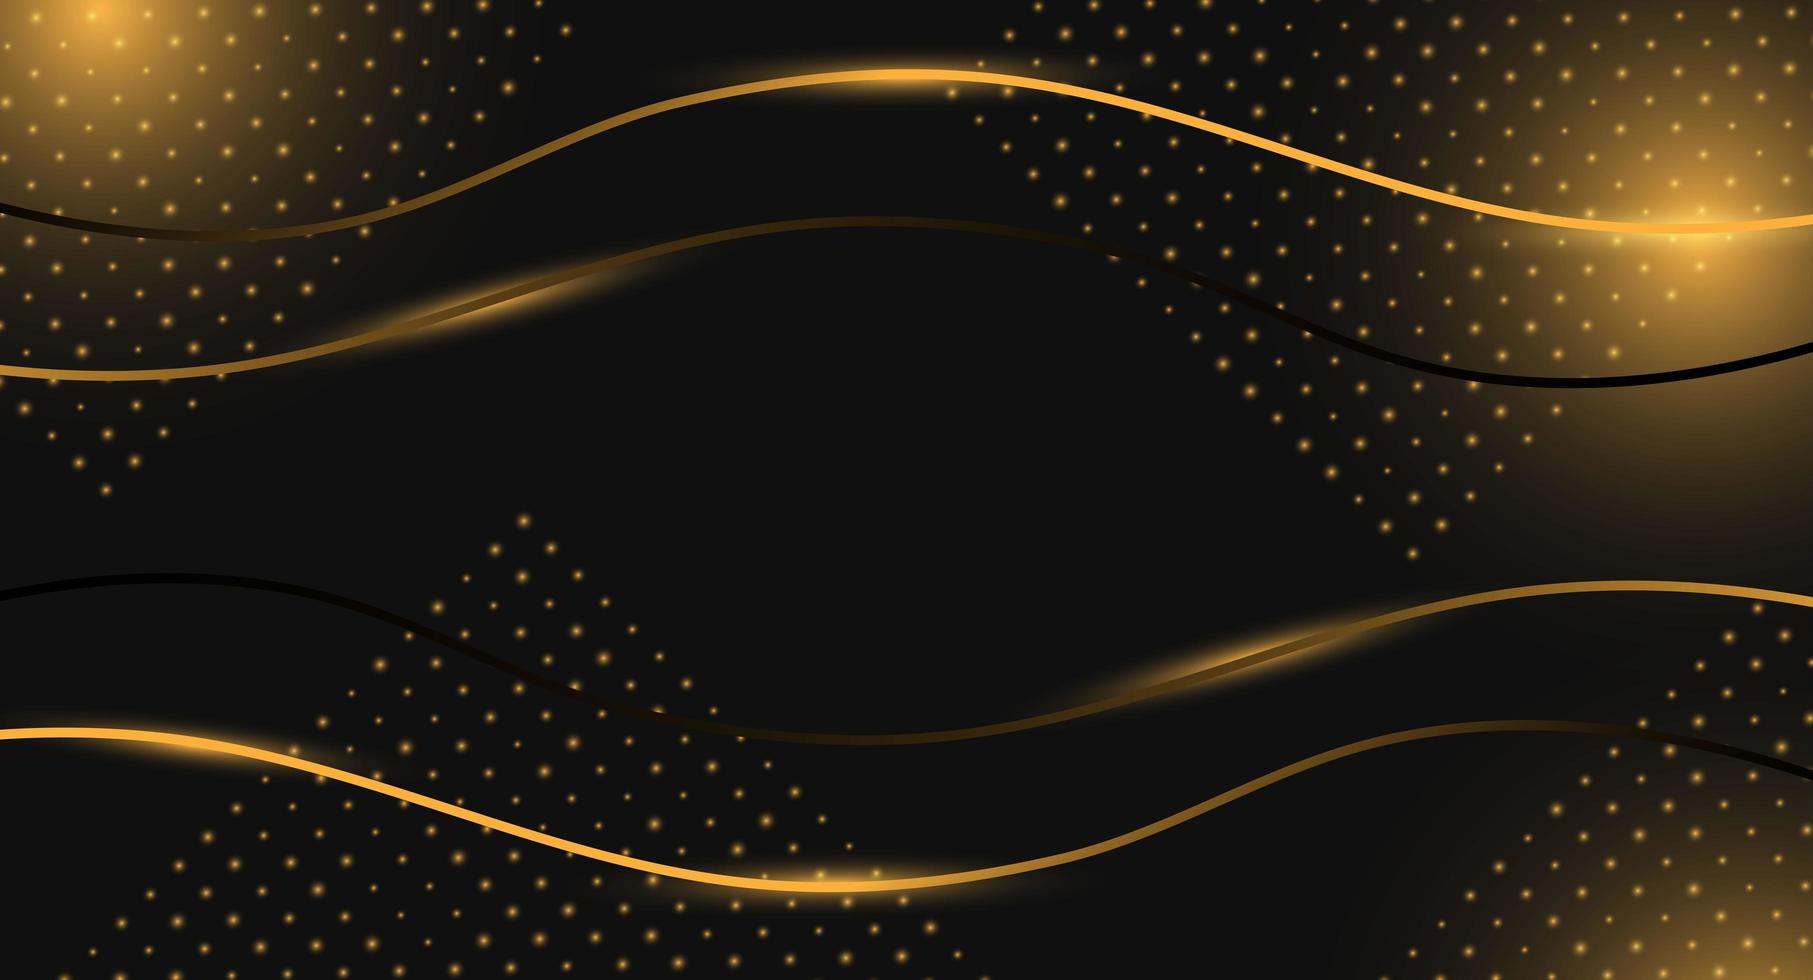 Dark Background With Glowing Golden Dots and Lines vector